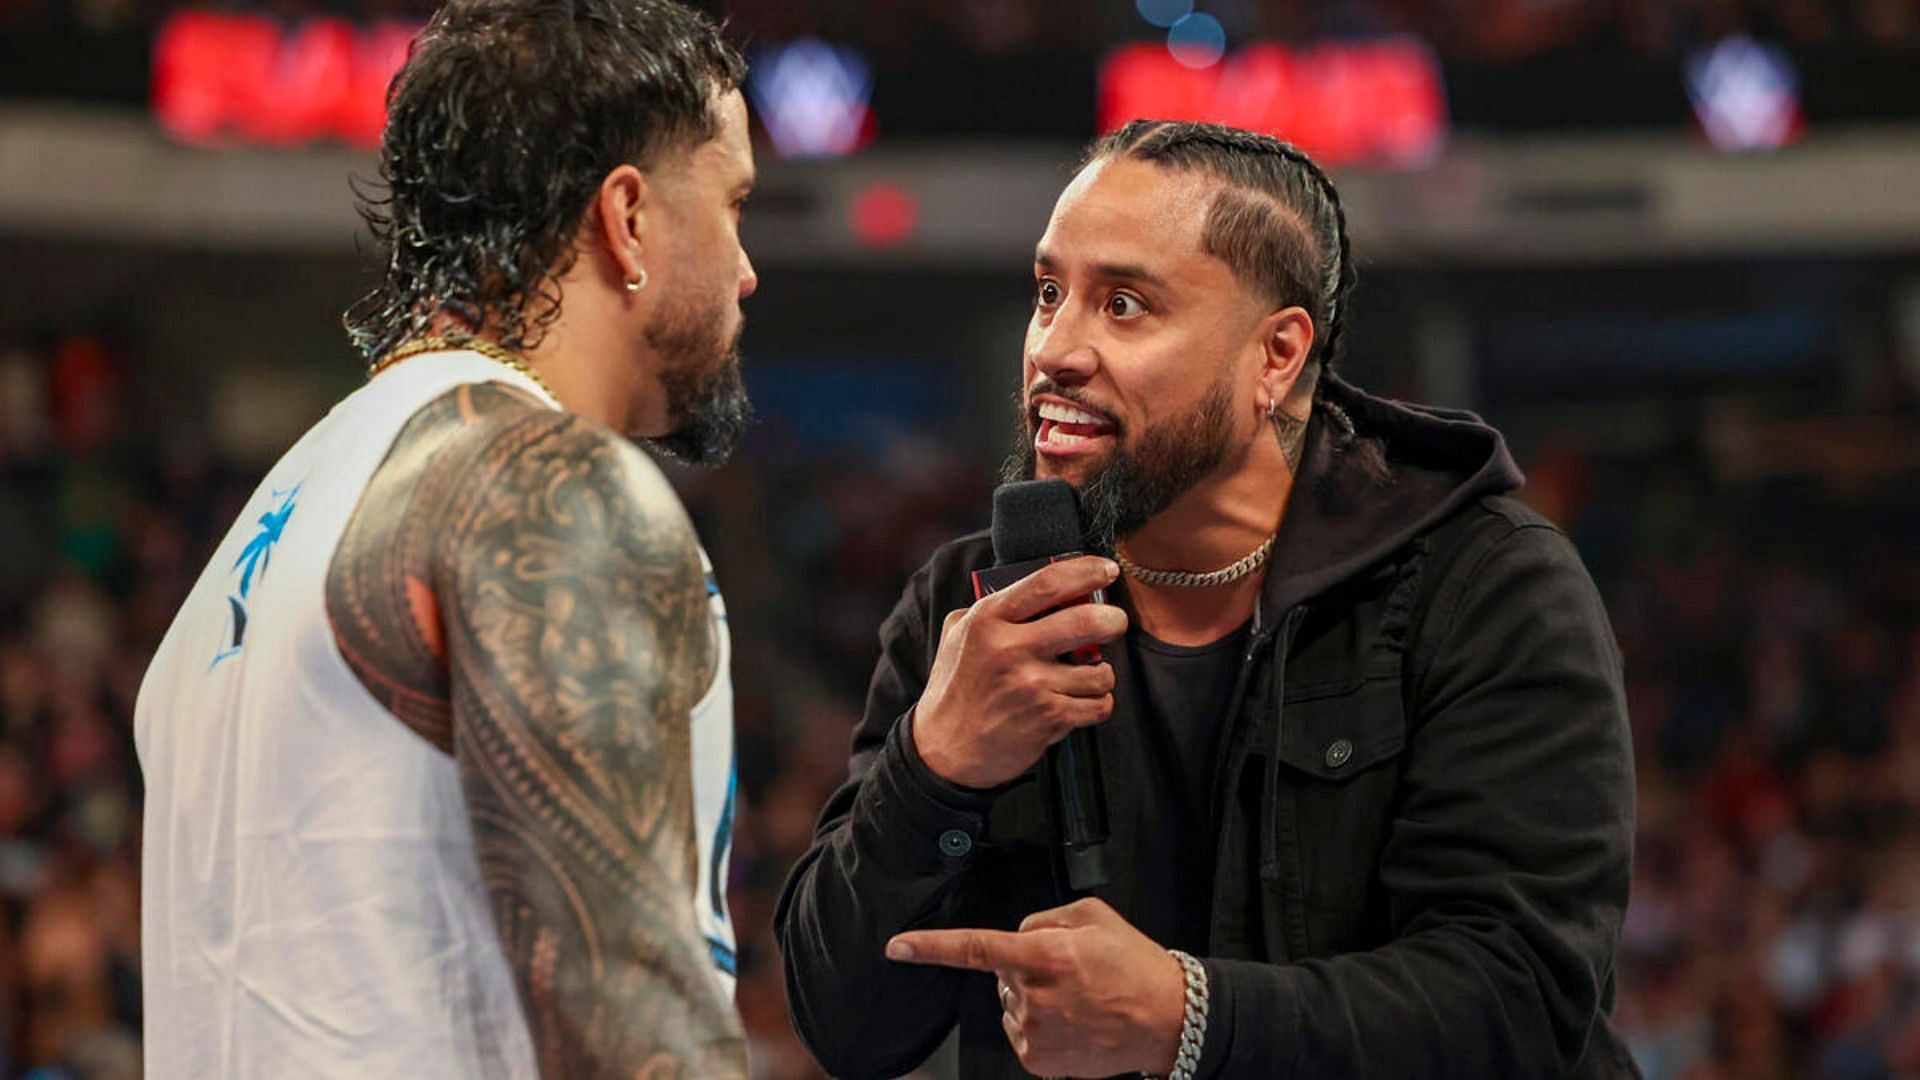 Jey Uso and Jimmy Uso will face-off at WrestleMania 40